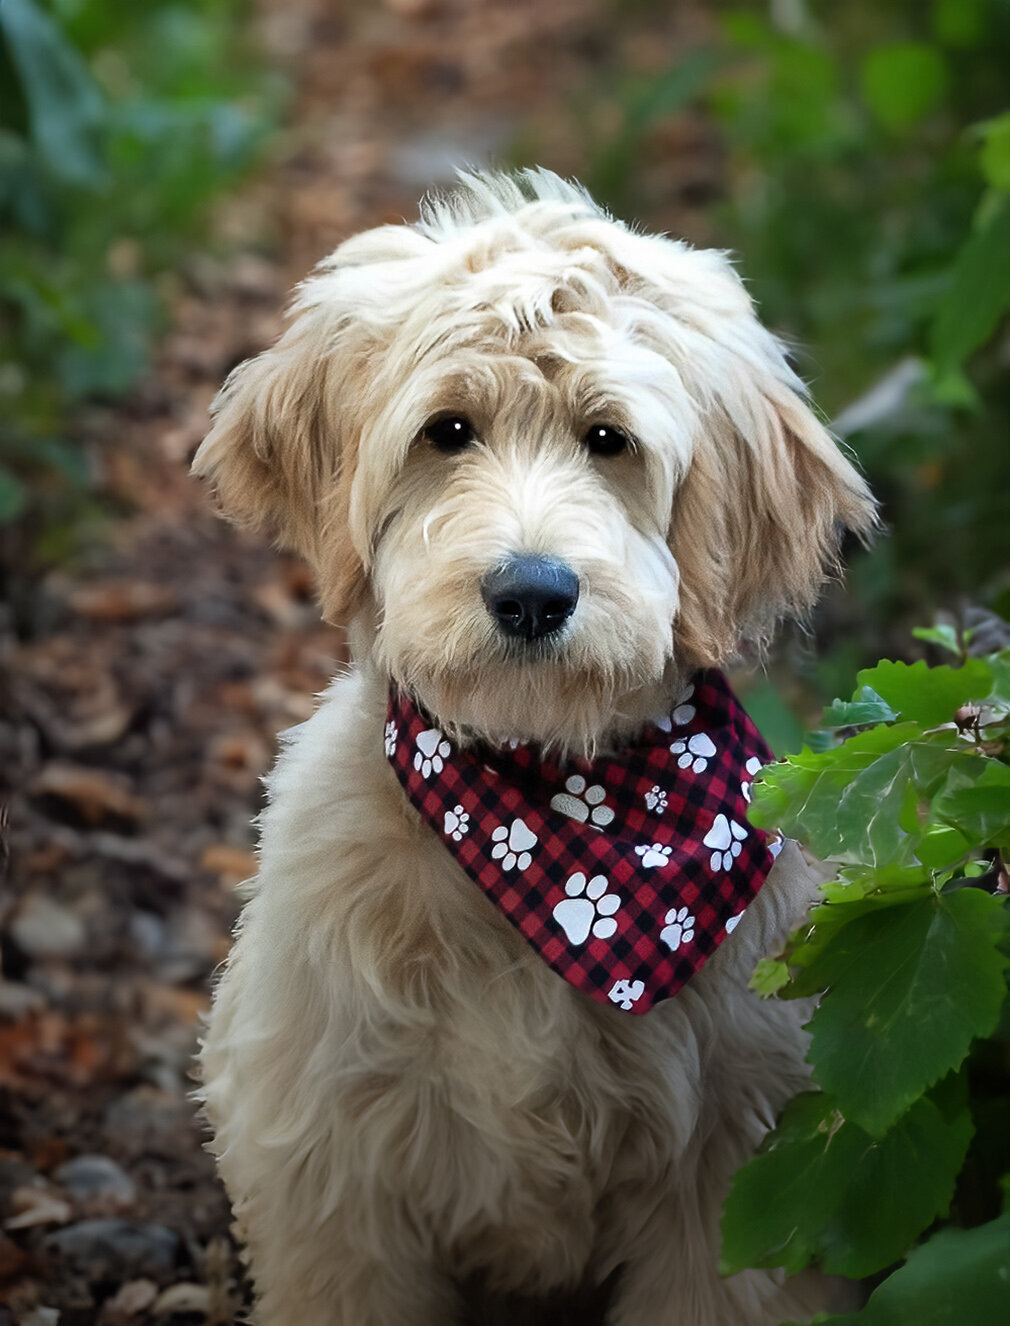 LABRADOODLE DOG POSING IN A NATURE SETTING WITH A  DECORATIVE COLLAR